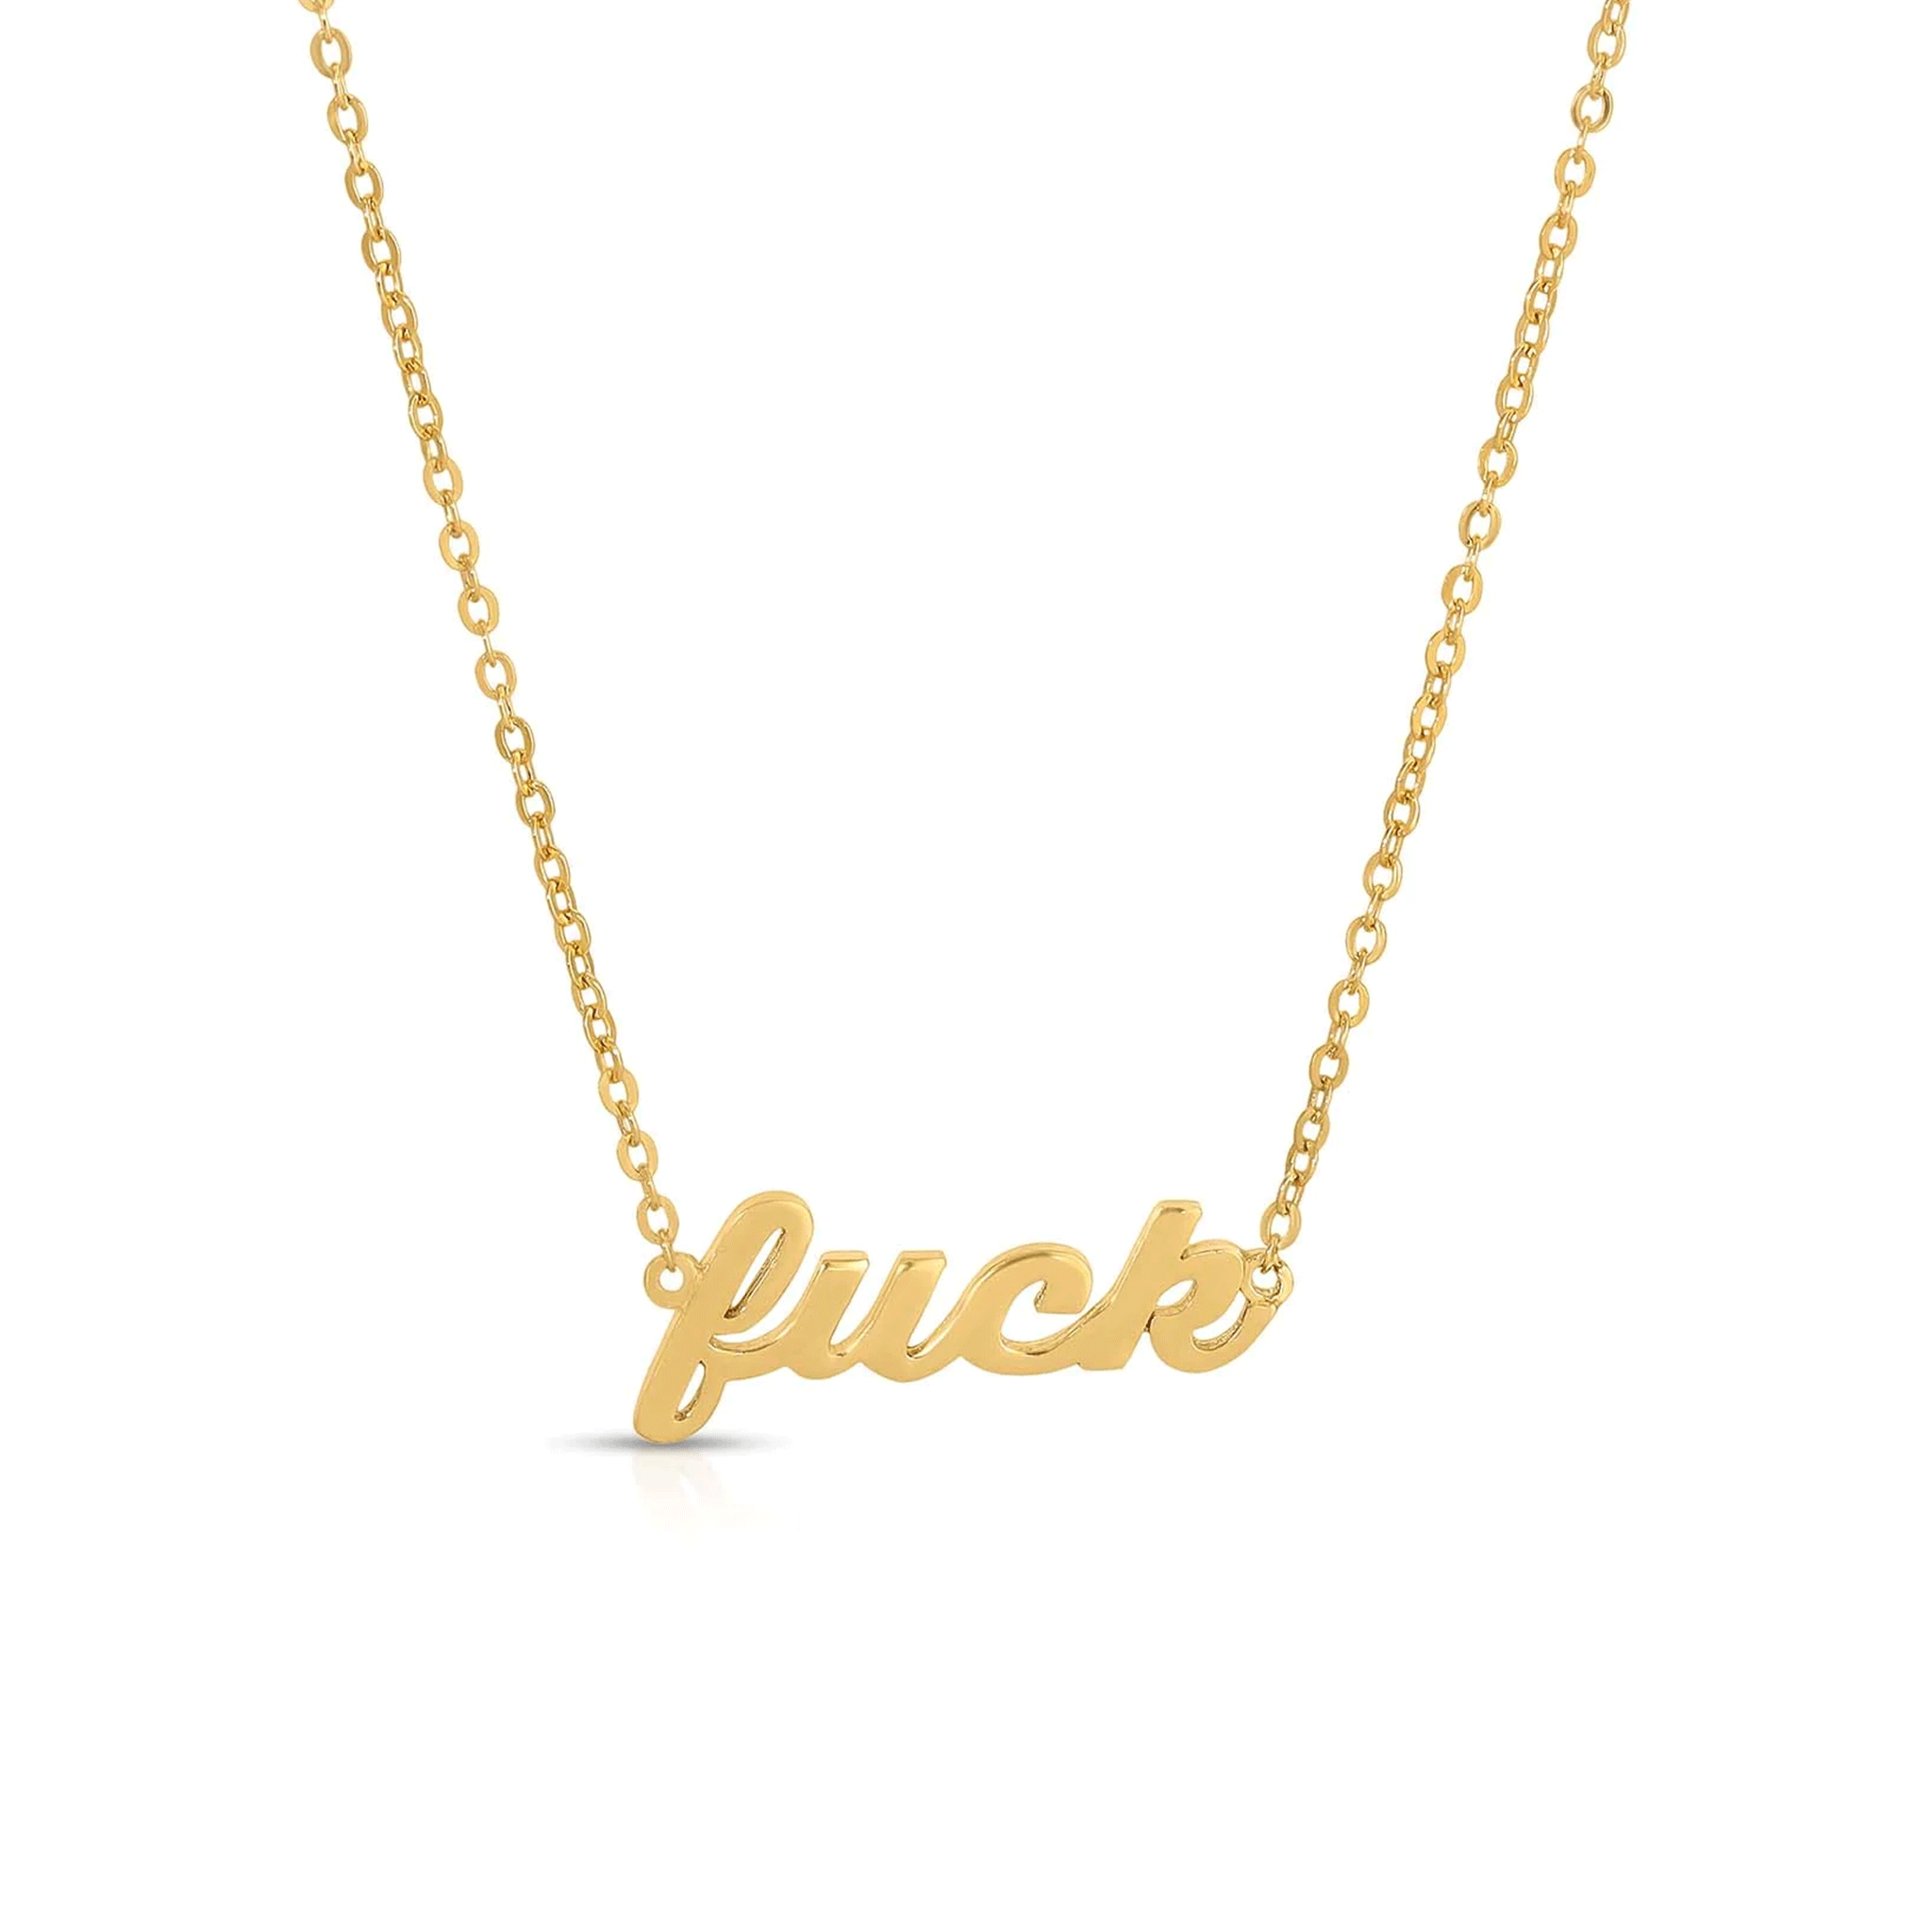 A gold chain necklace with the word, &quot;fuck&quot; attached as a pendant.